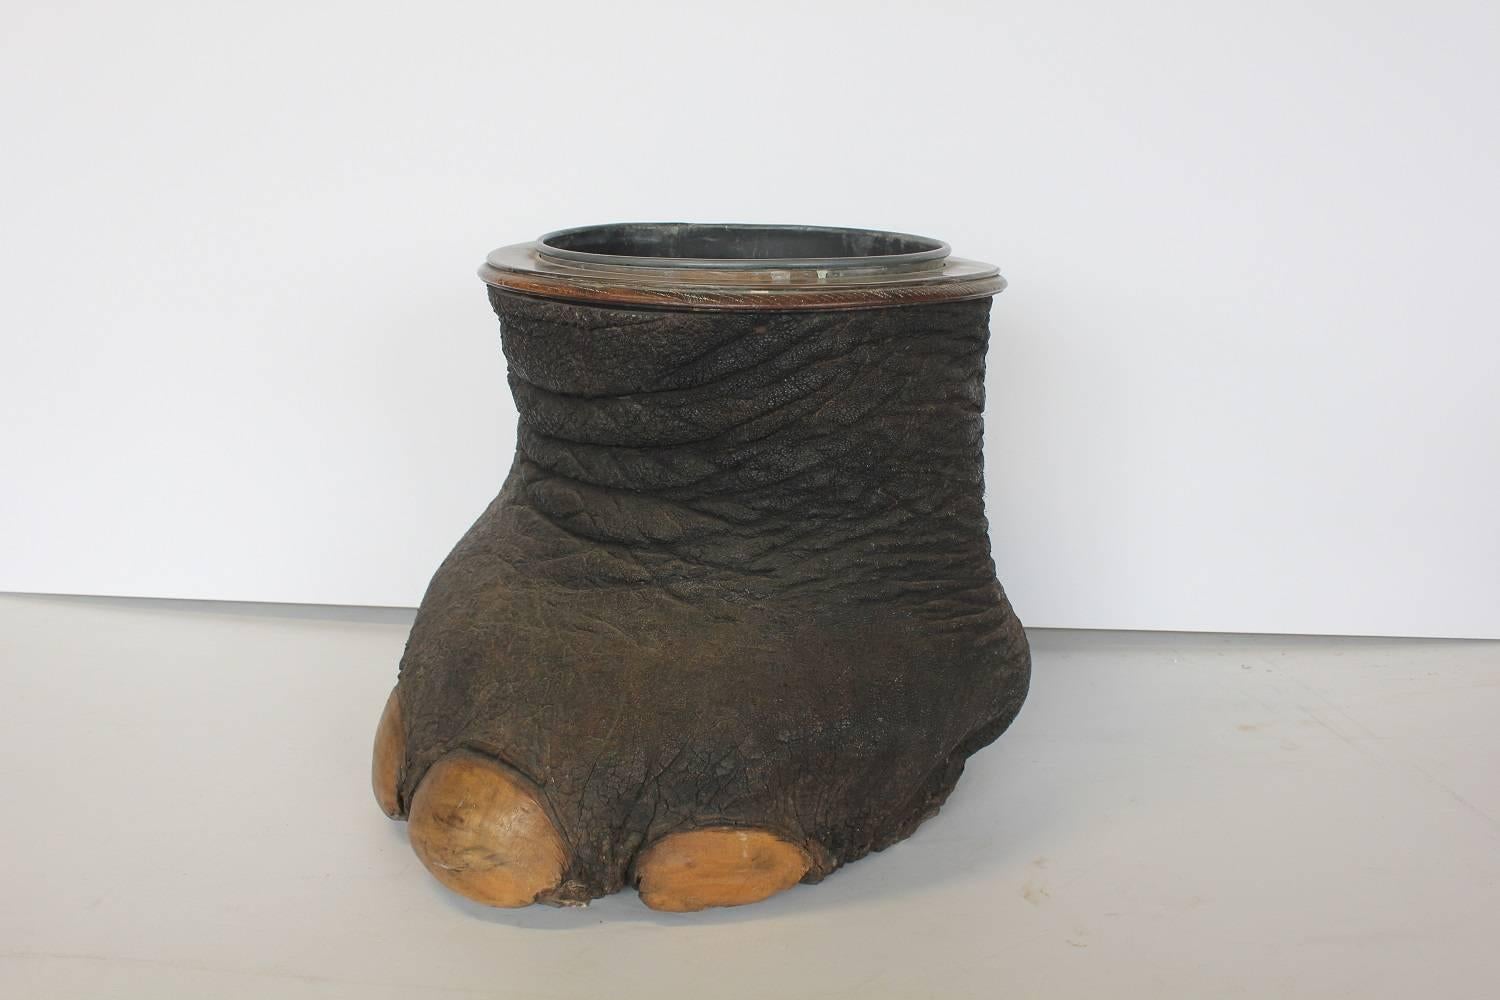 Antique taxidermy elephant foot with insert metal container. It could be used as stool/waste basket, wine cooler or planter.